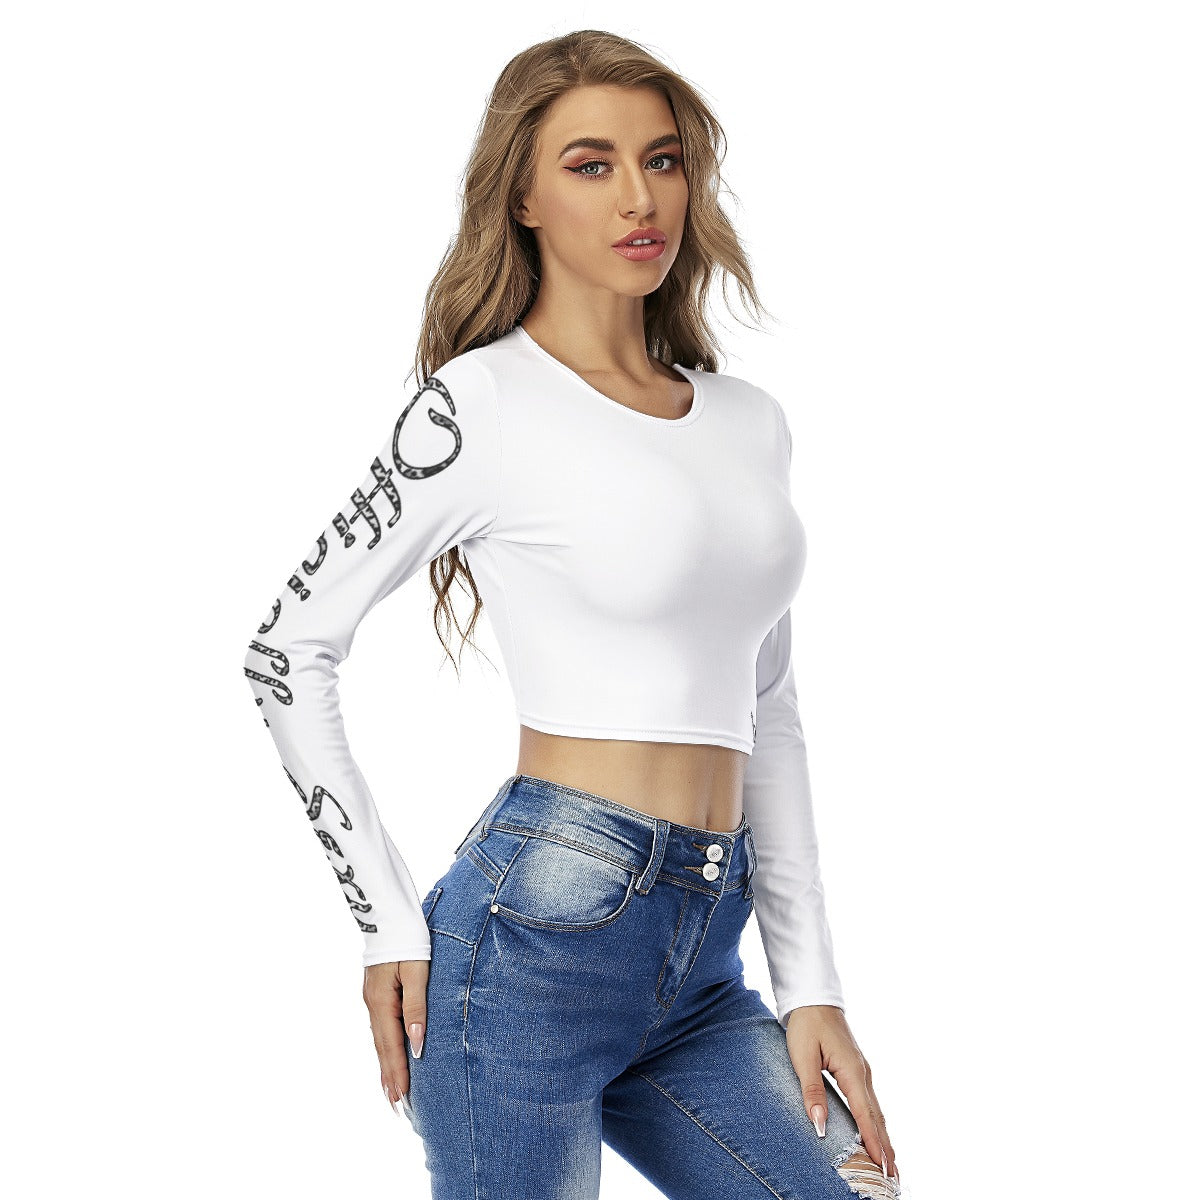 Officially Sexy Snow Leopard Print Collection Women's White Round Neck Crop Top Long Sleeve T-Shirt (English) 2